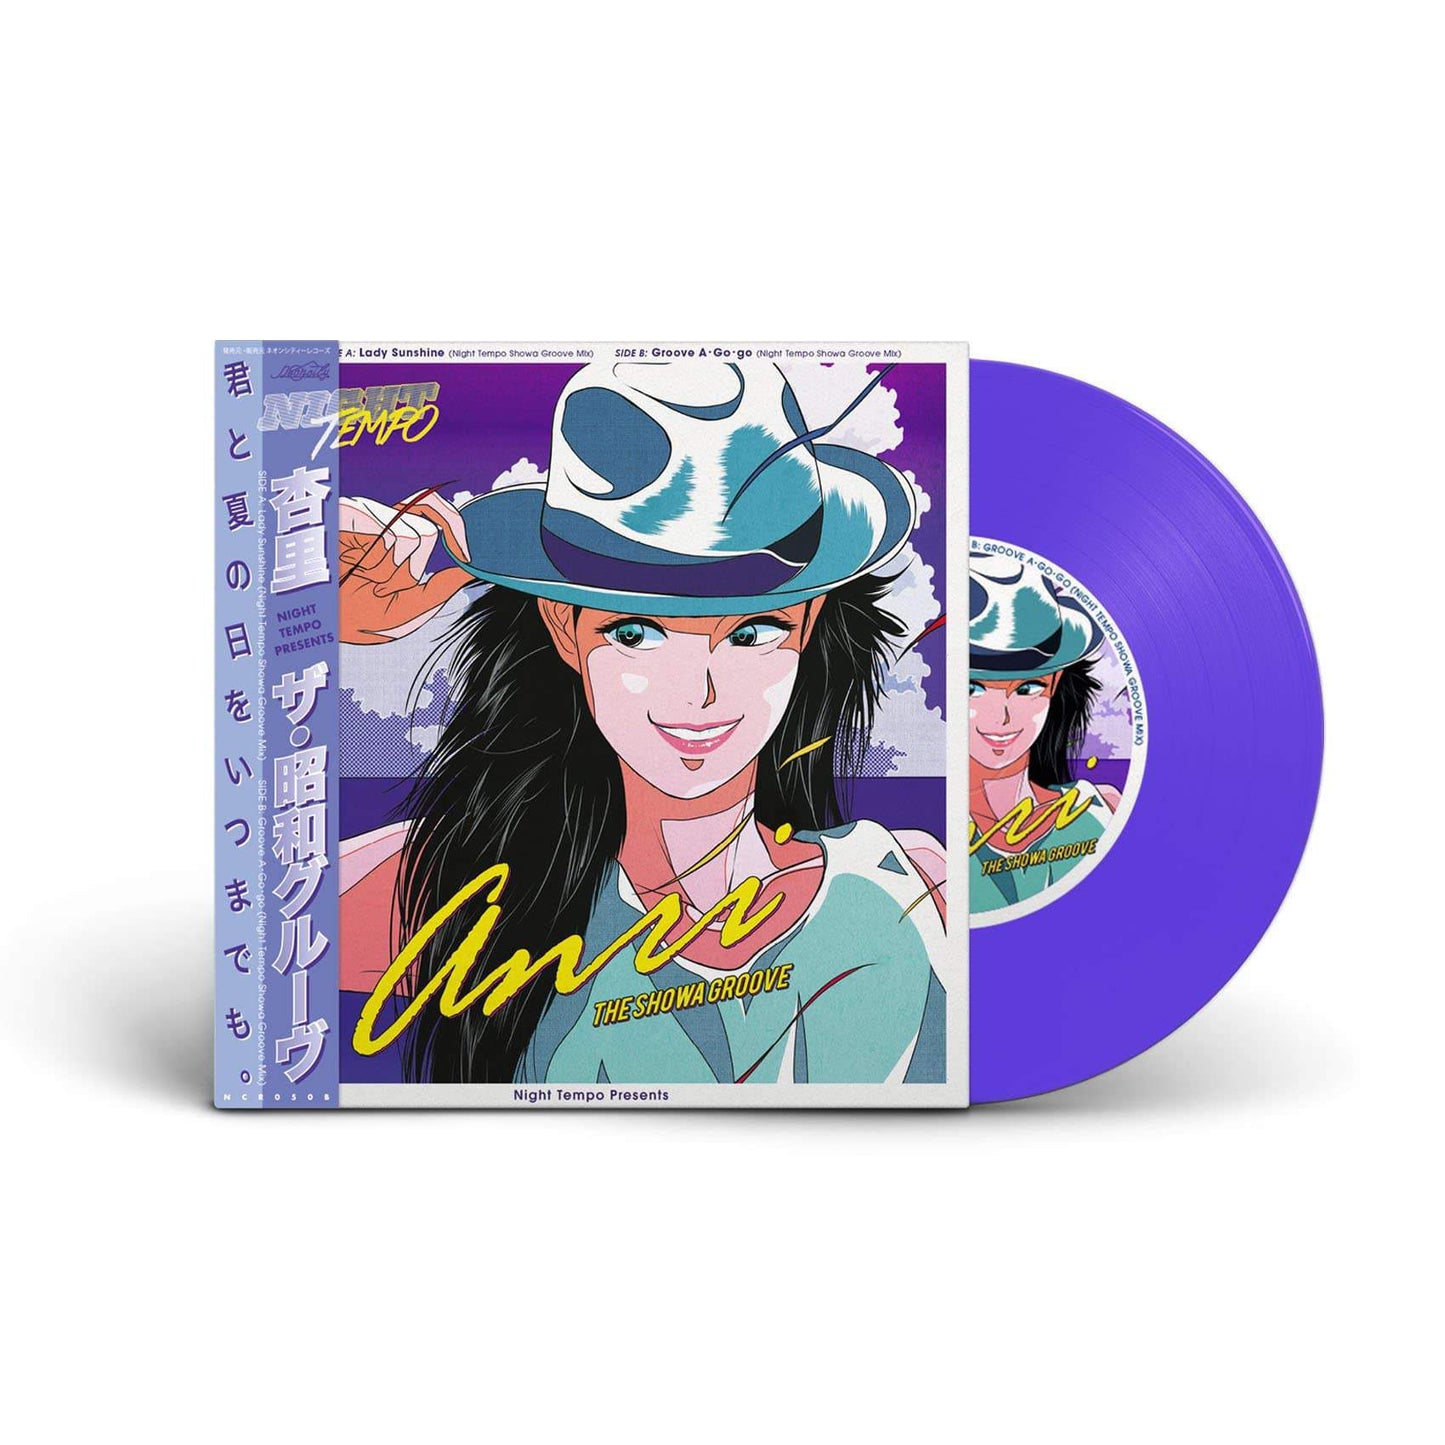 [EP2] Anri - Night Tempo presents The Showa Groove (Limited Edition 7" Vinyl) - Neoncity Records